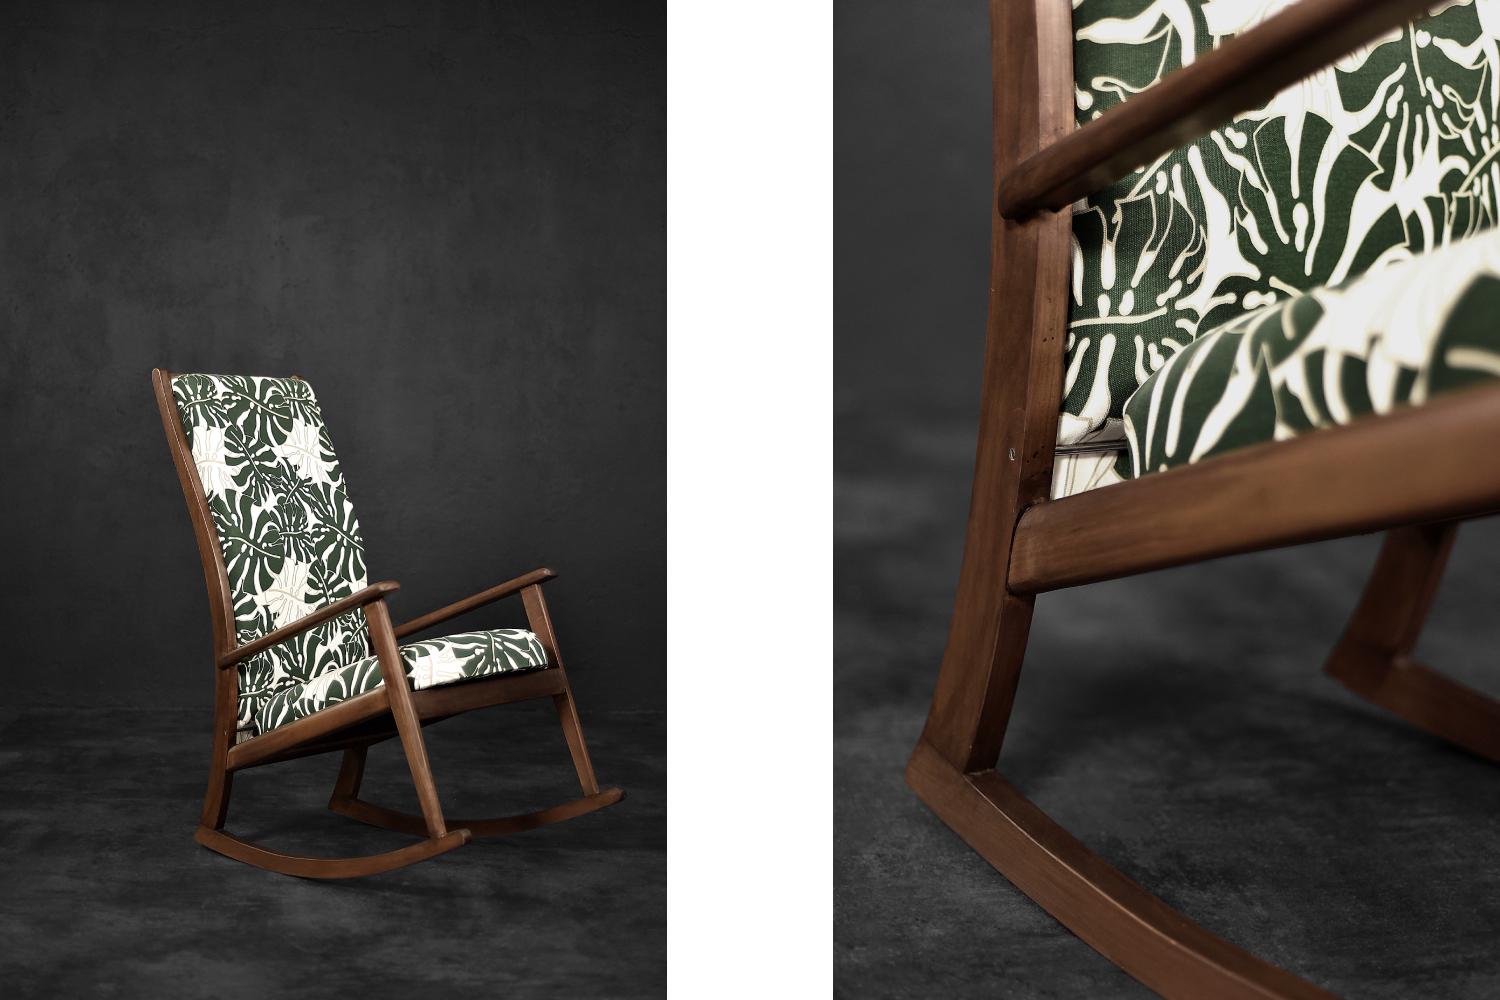 This high rocking chair was made in Denmark during the 1960s. The frame is made of wood in a dark shade of brown. The seat and backrest are upholstered with high-quality gabardine with a fashionable pattern of Monstera deliciosa leaves. It is a